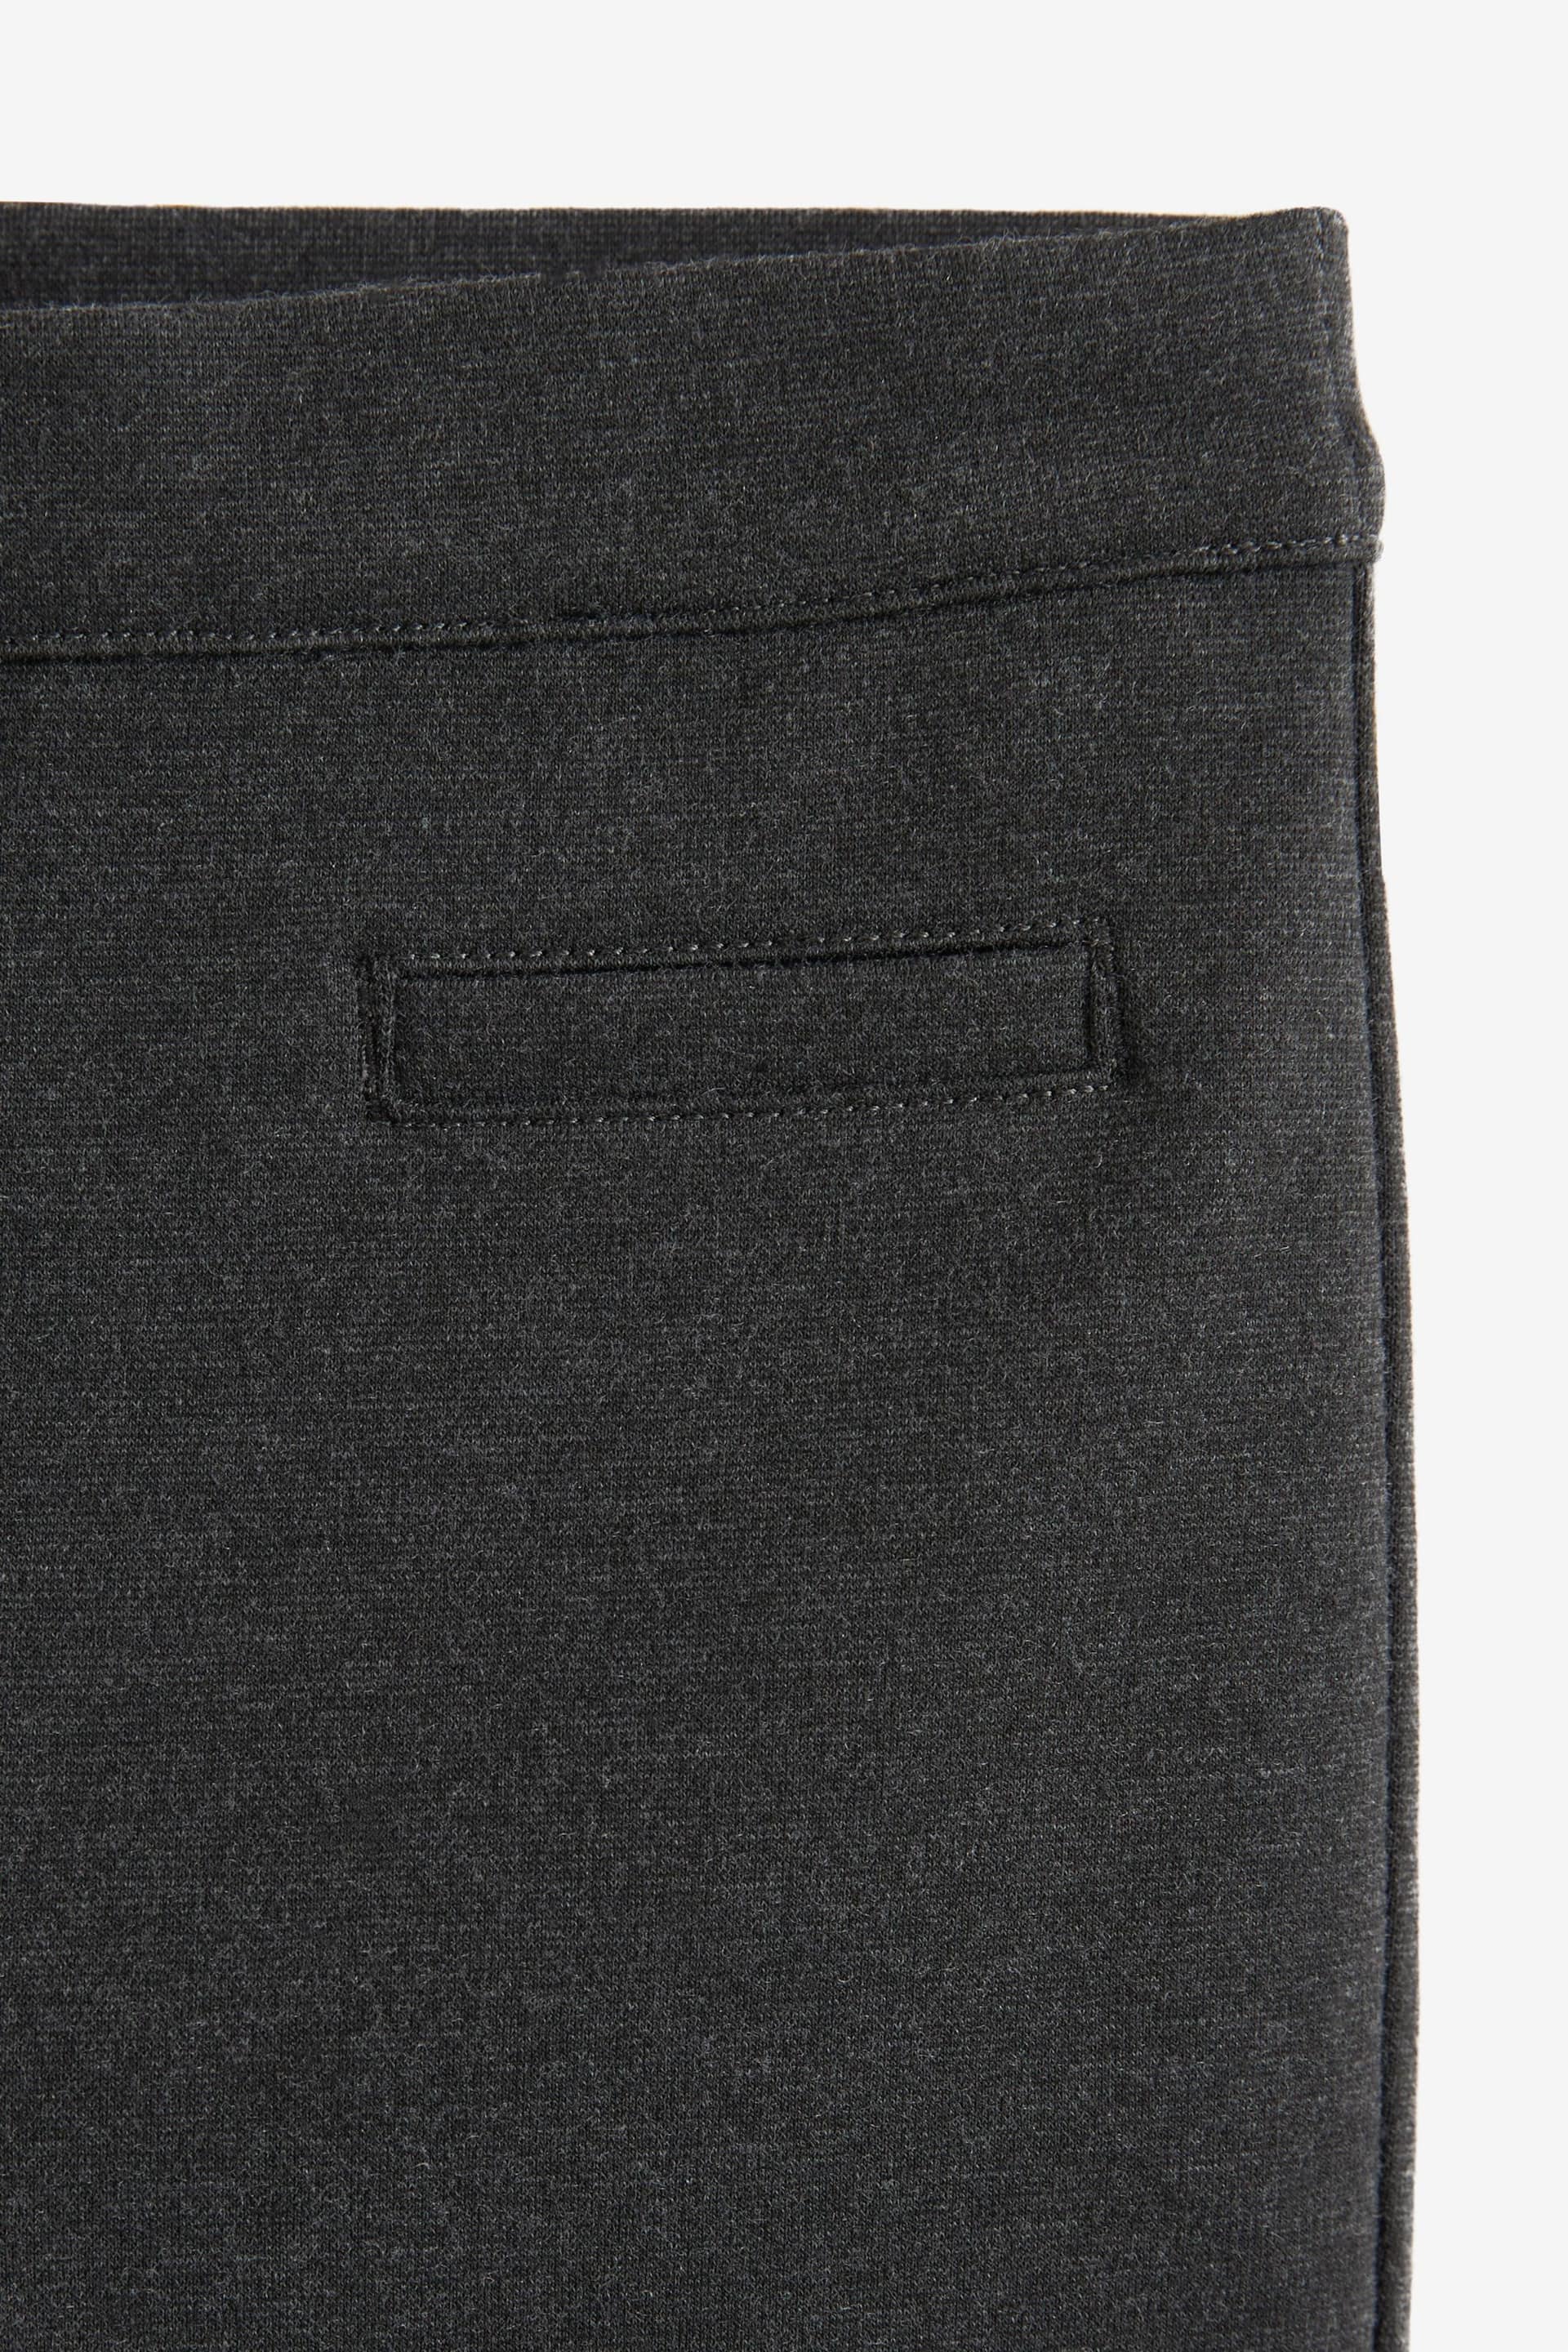 Grey Jersey Stretch Pull-On Skinny School Trousers (3-16yrs) - Image 6 of 6